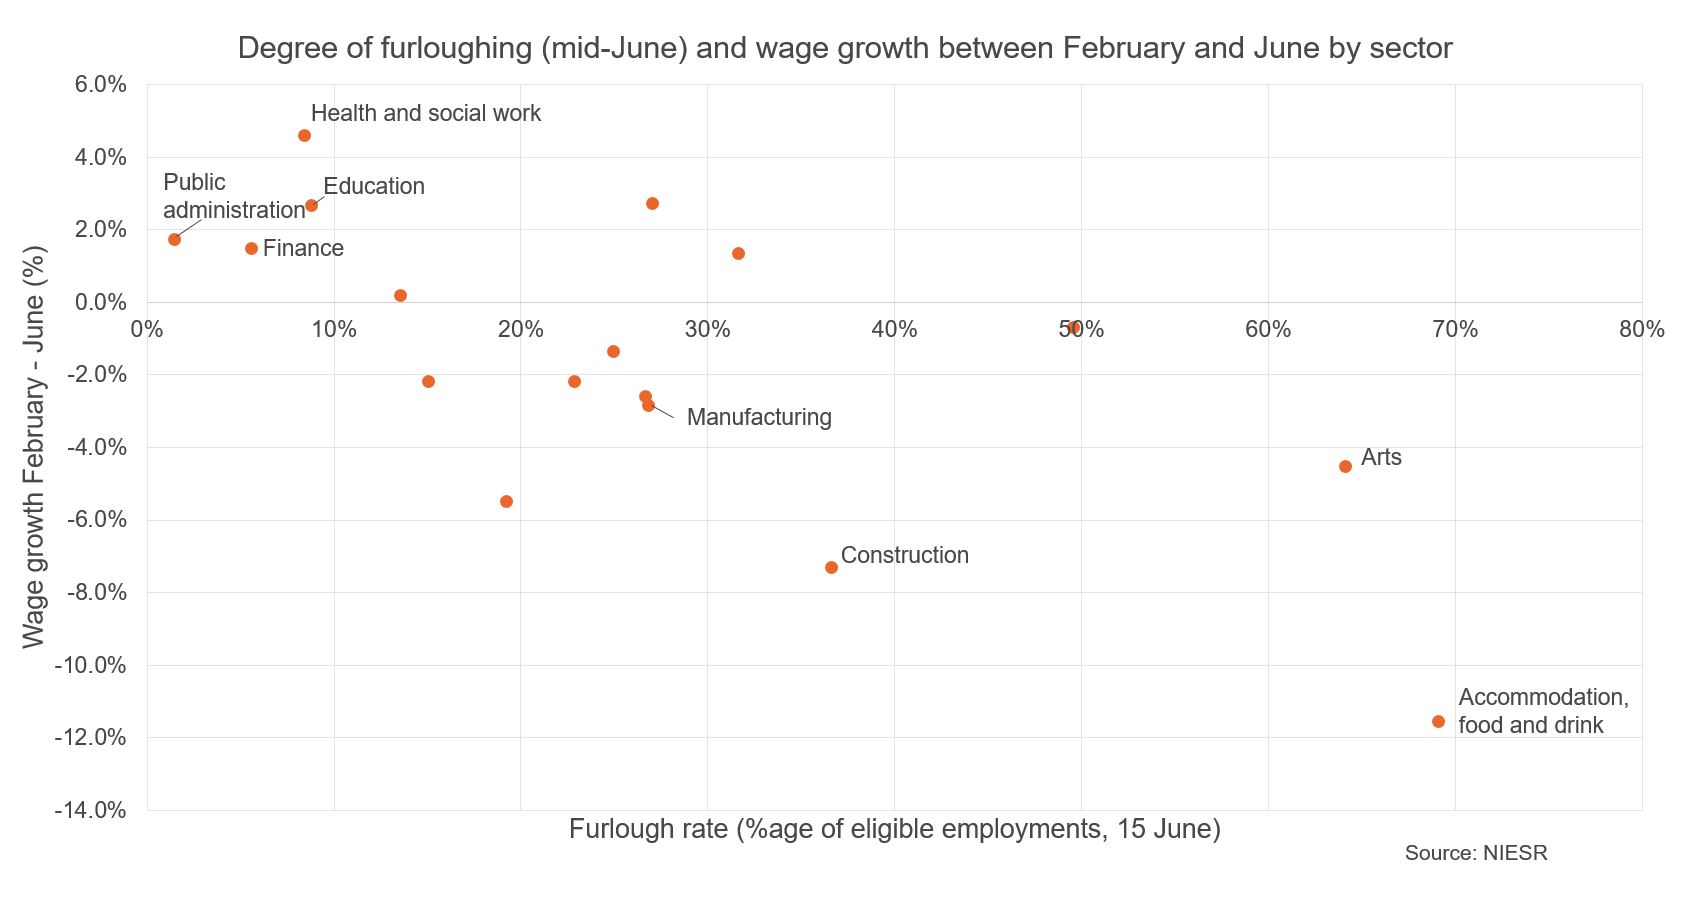 Figure showing degree of furloughing & wage growth